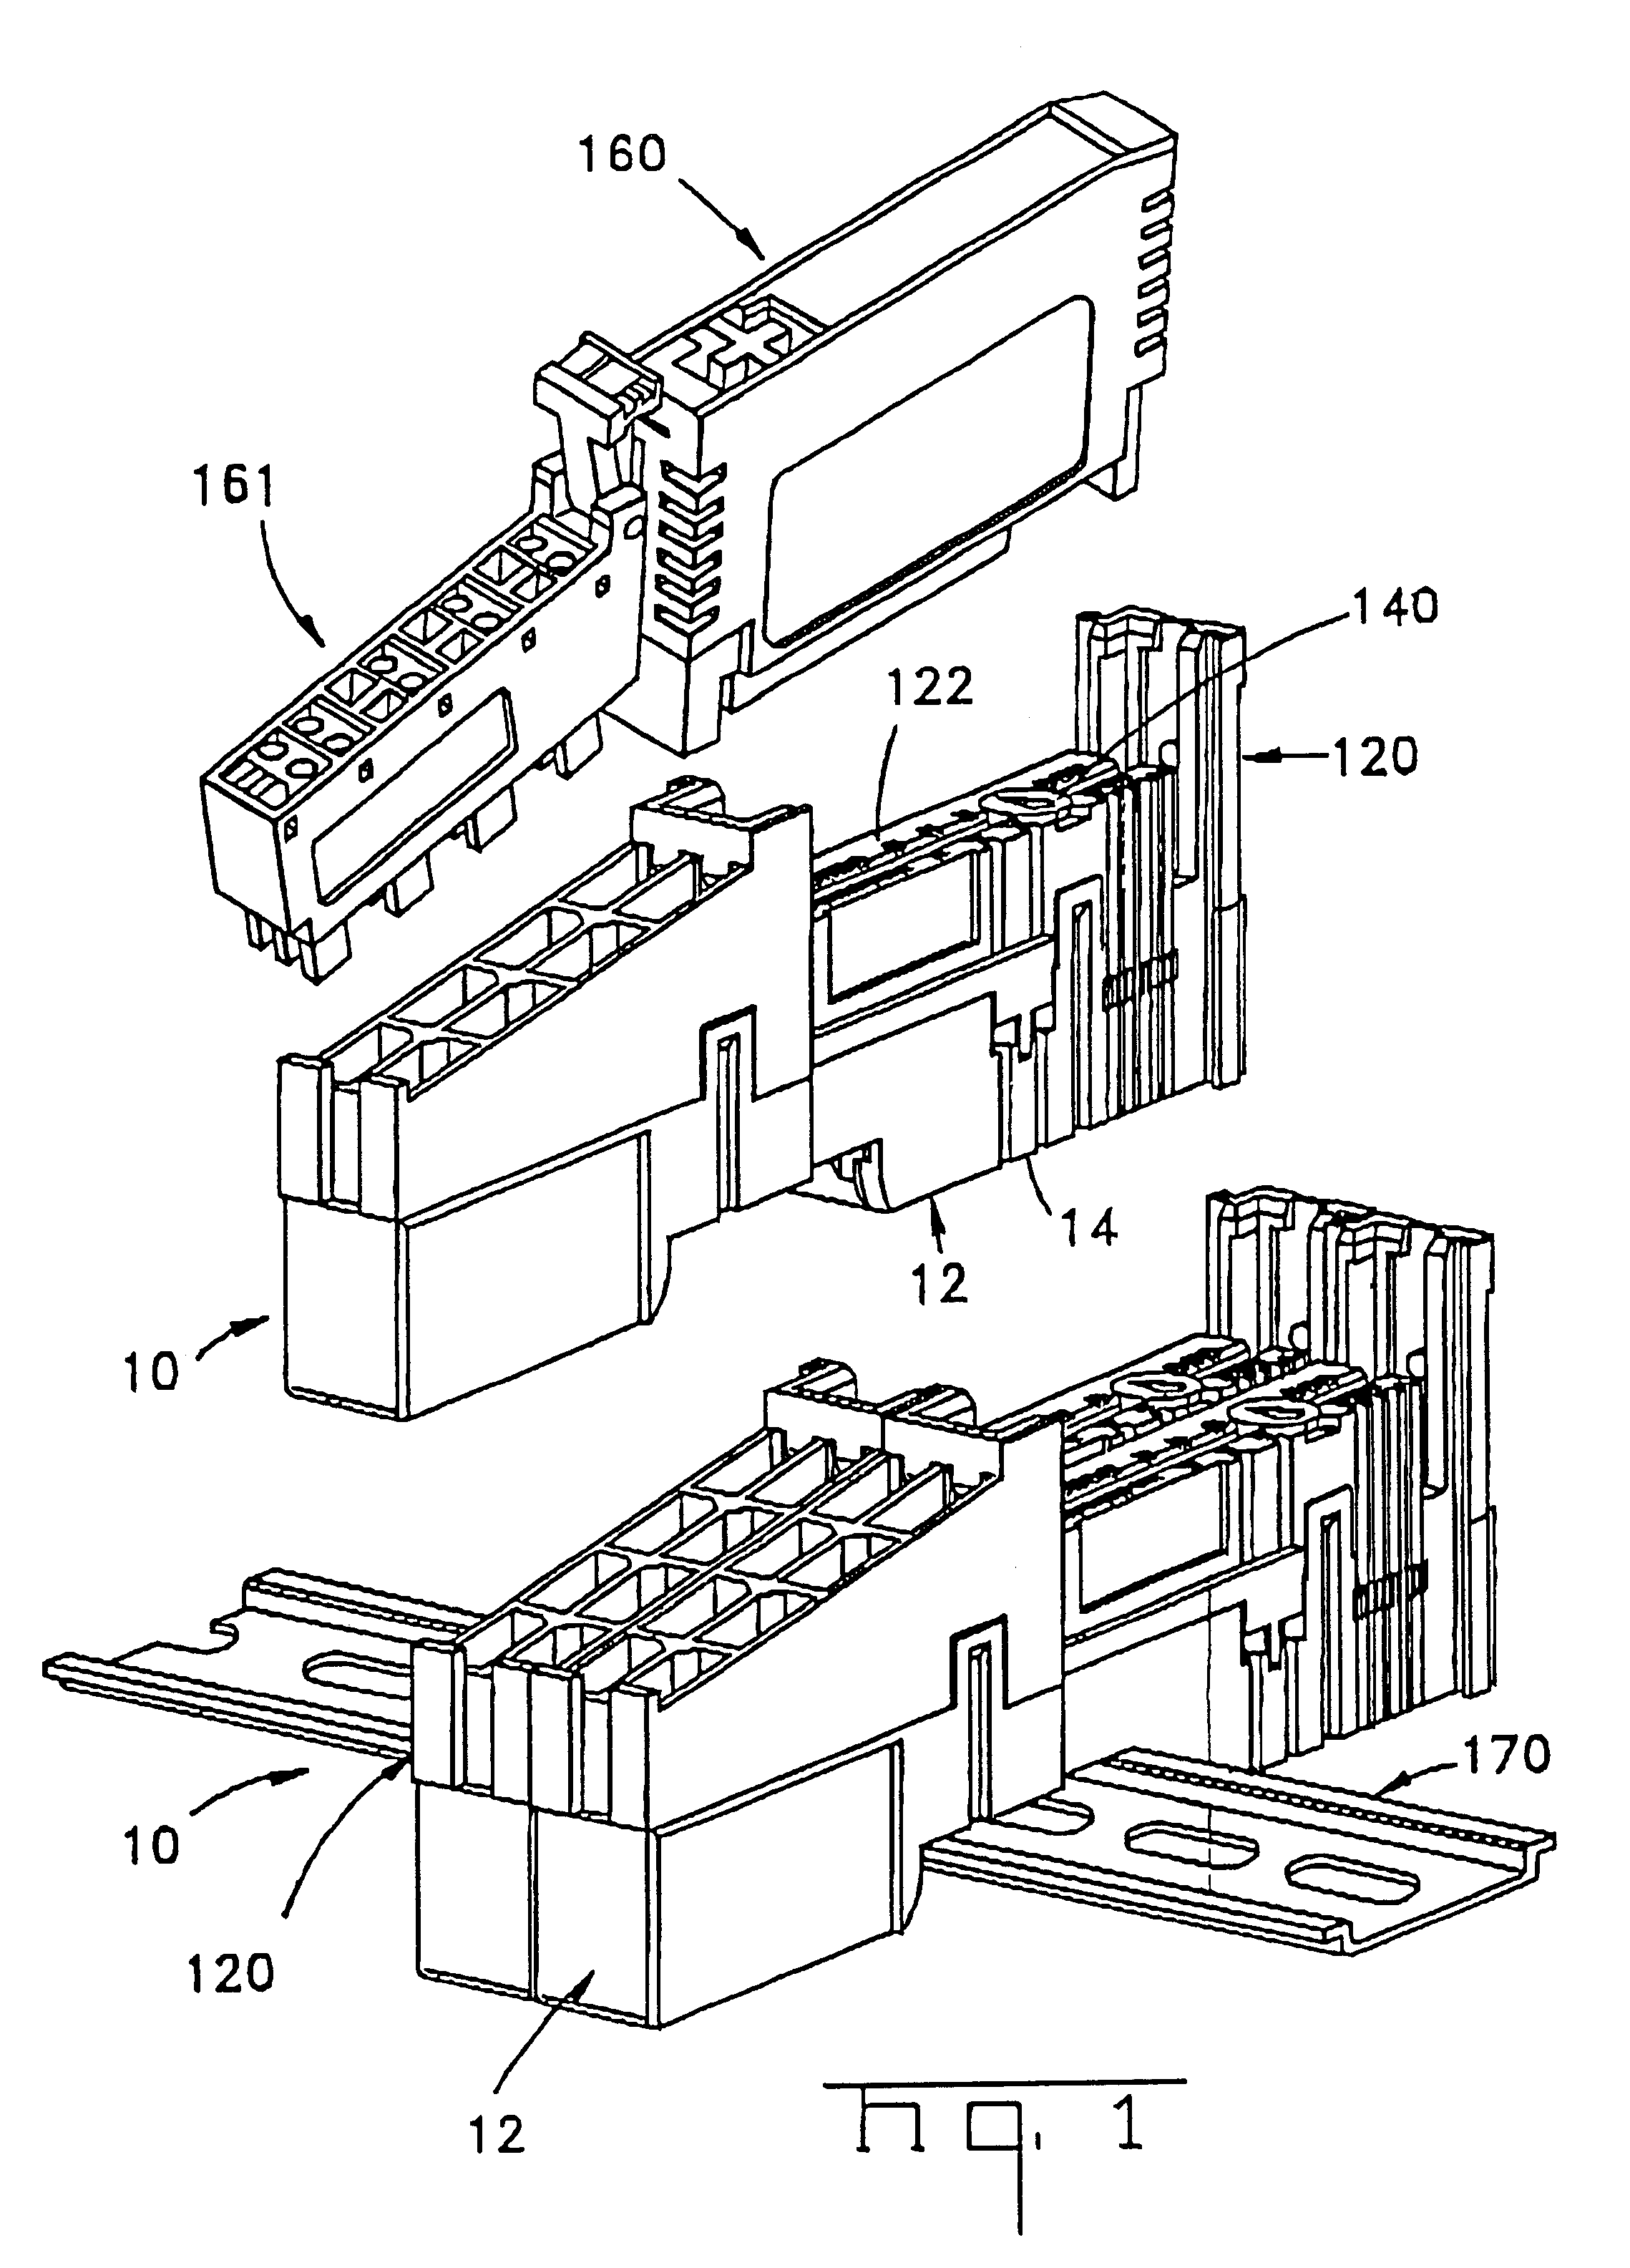 Input/output device having removable module